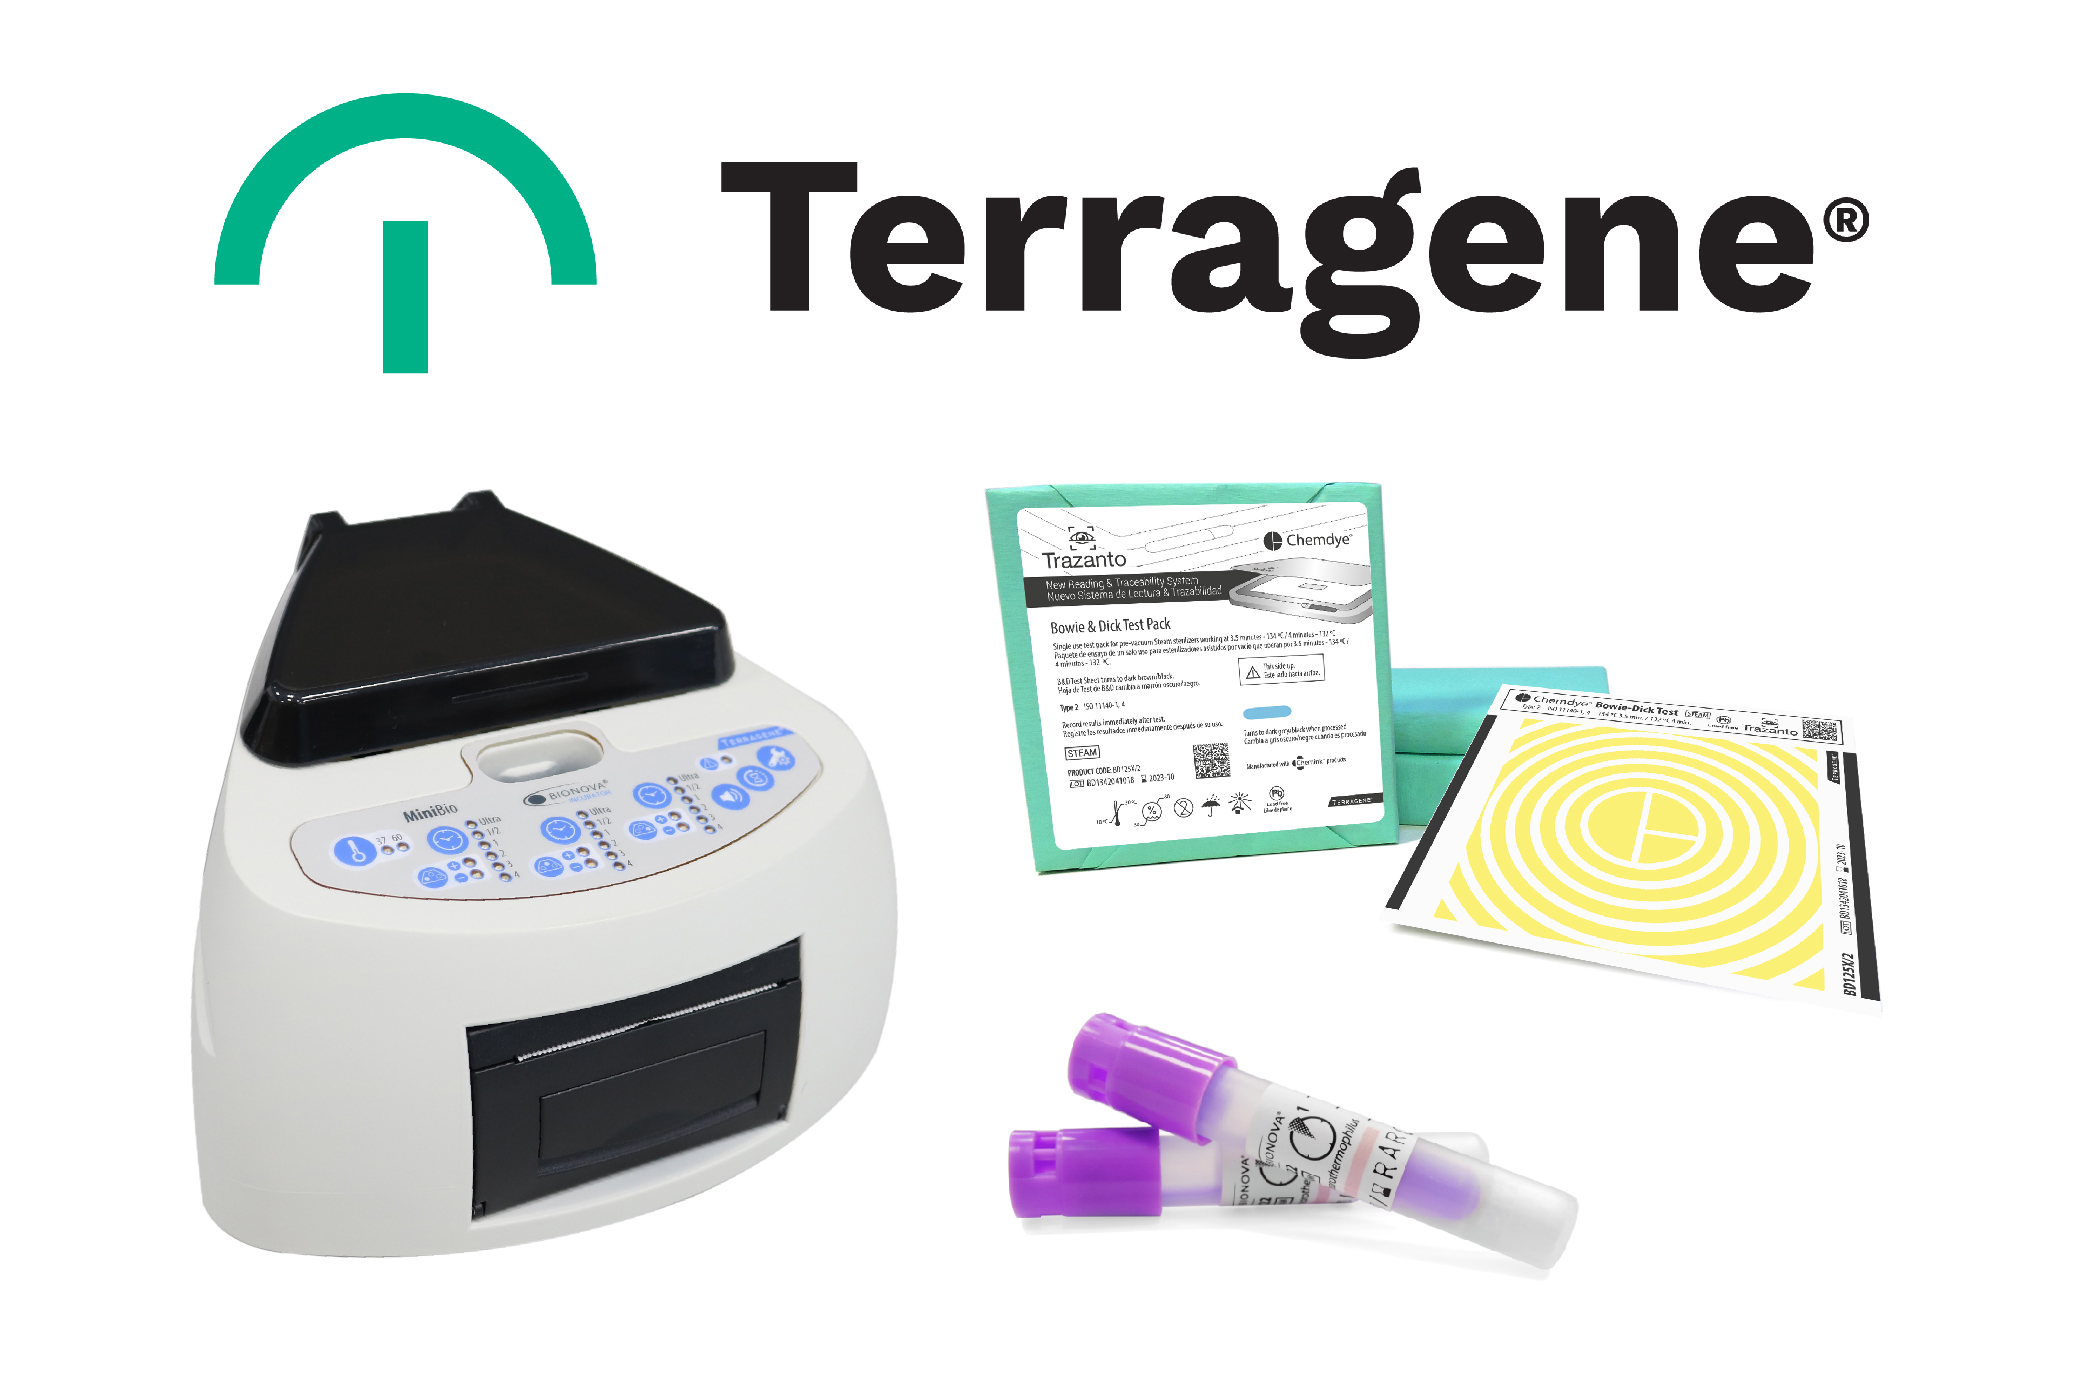 Terragene infection control solution